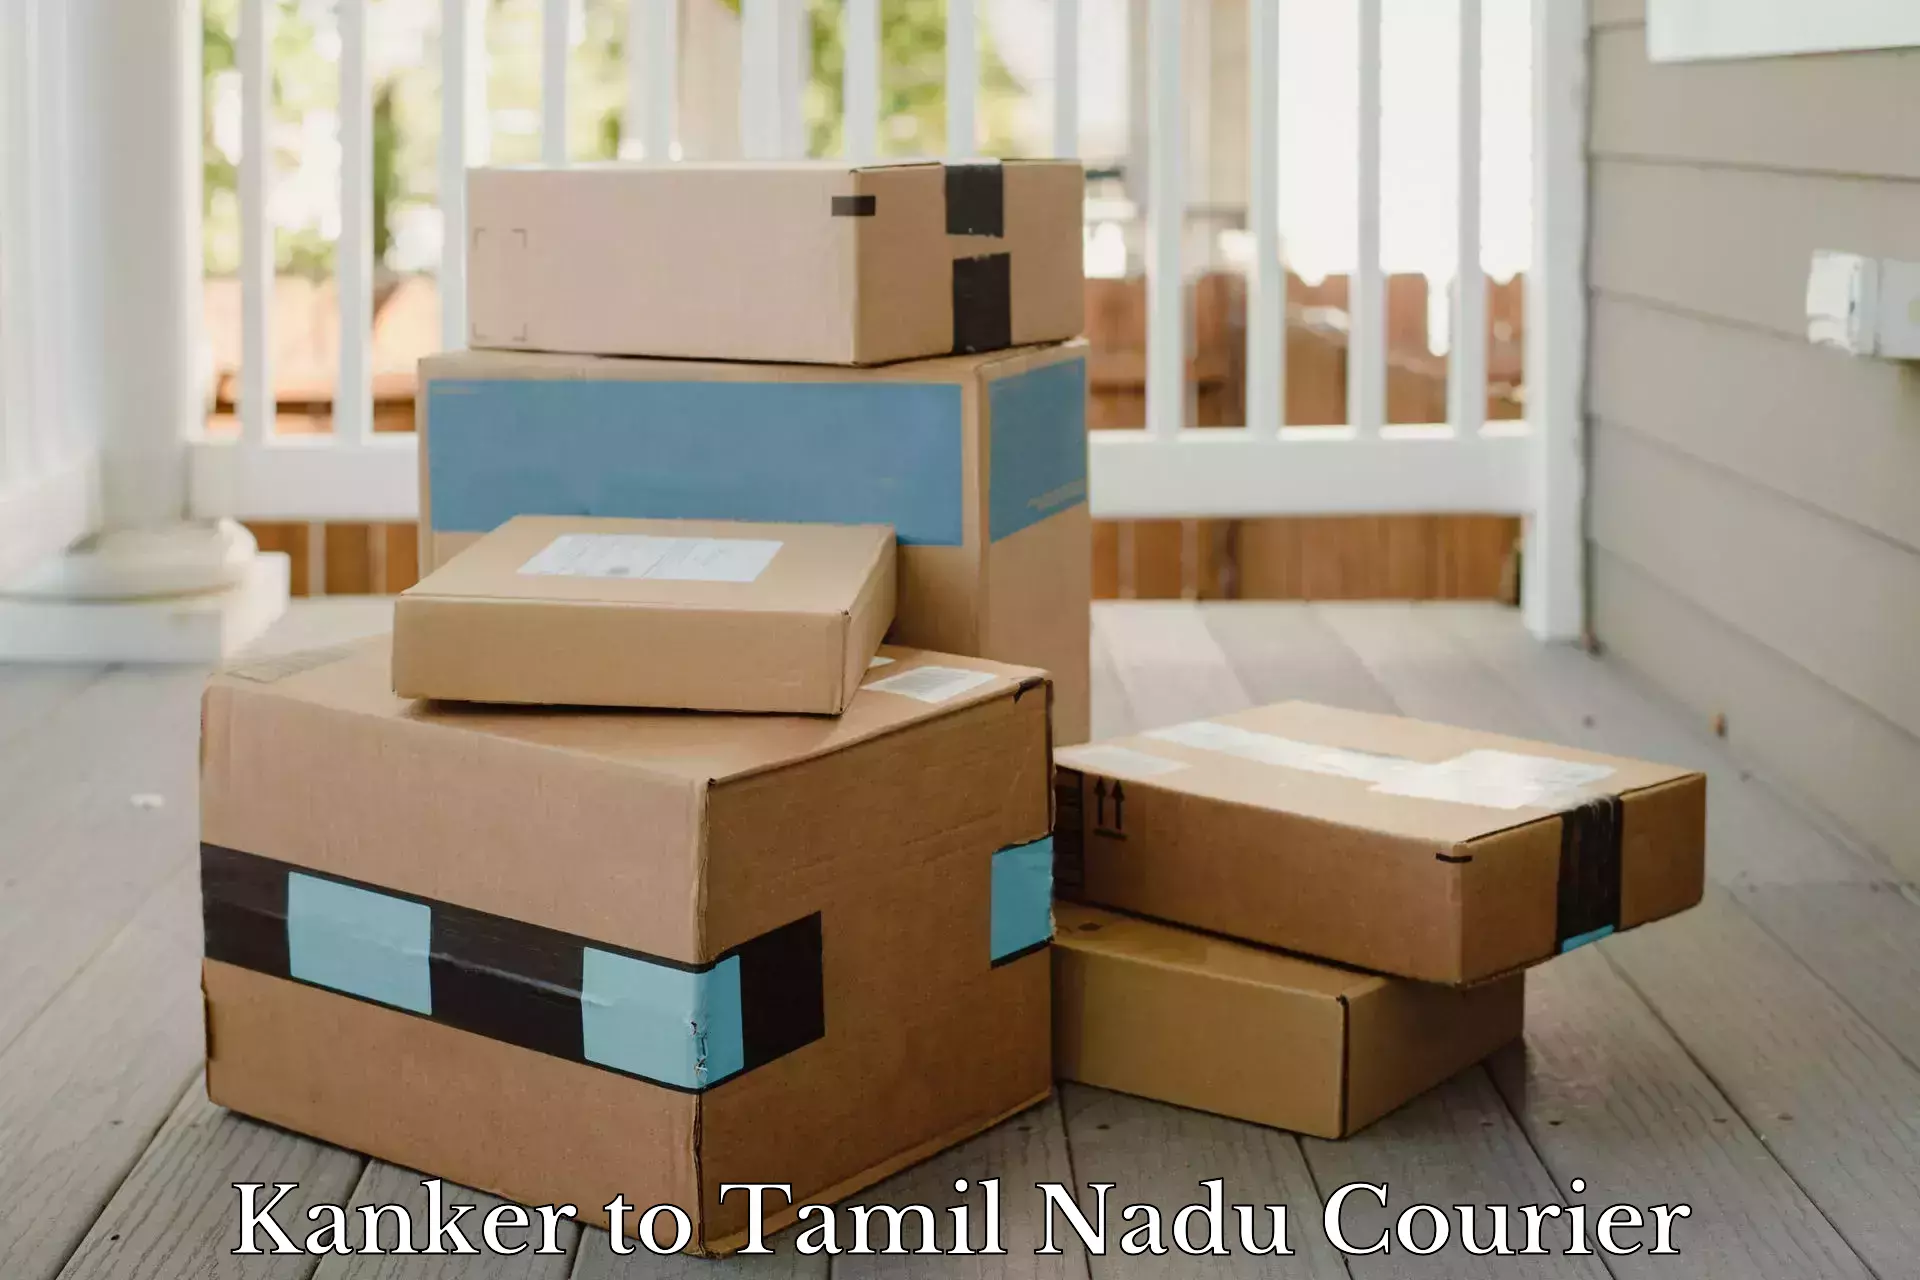 Cross-border shipping in Kanker to Vriddhachalam